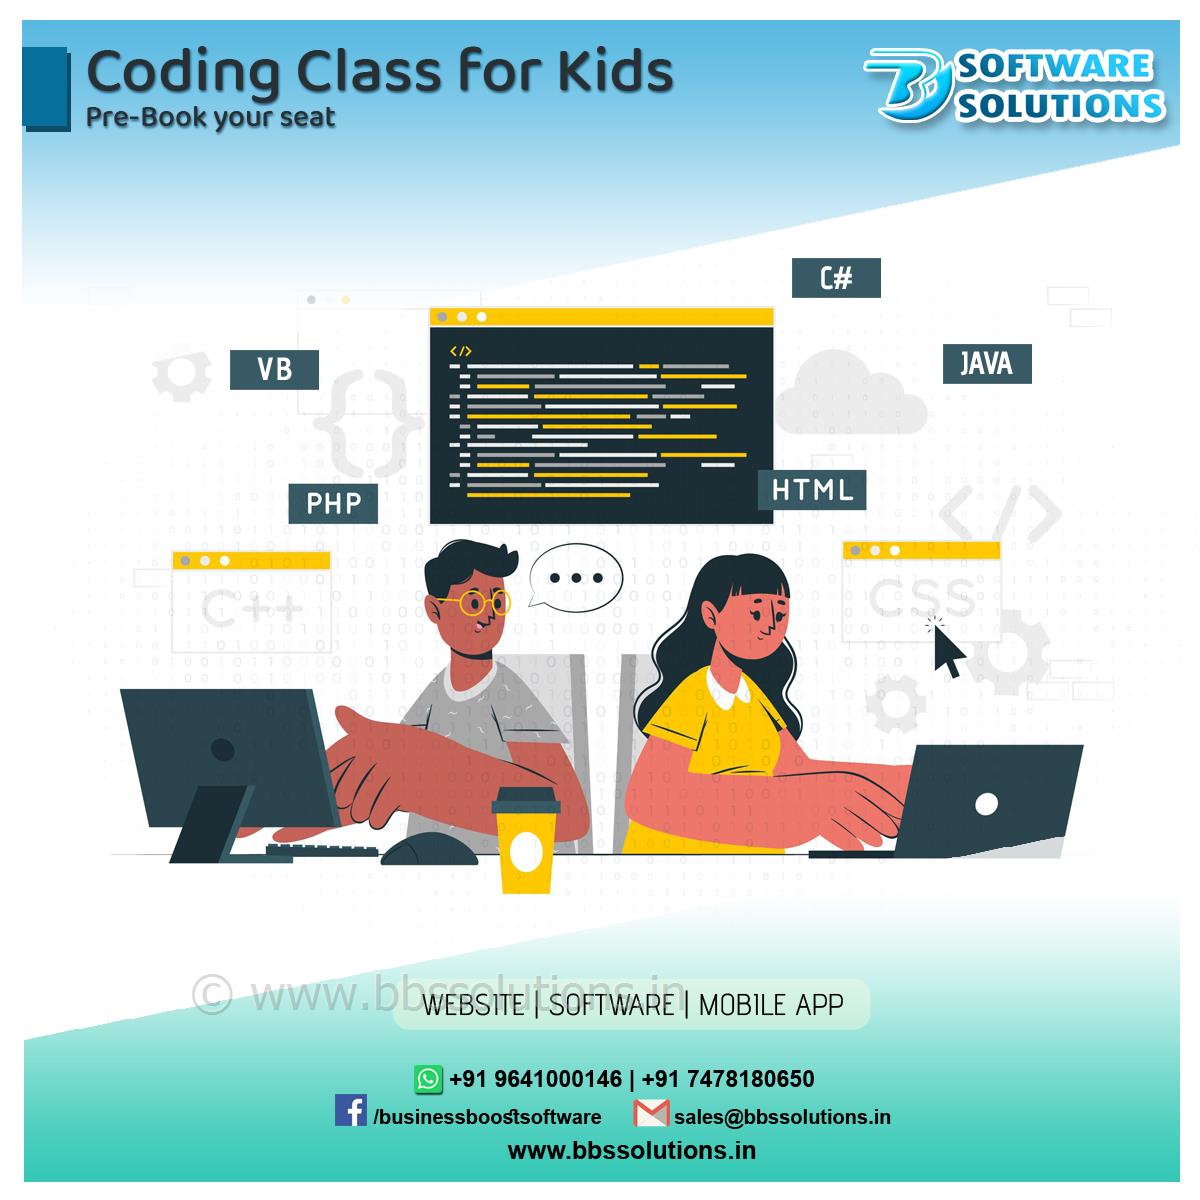 5 Reasons why Coding is Important for Young Minds :: Coding Class for ...  Business Boost Software Solutions do Best Software ,Web Development,Mobile App solutions provider in siliguri , india, WestBengal , Assam , Siliguri , Jalpaiguri ,Dhupguri,
    Best website designing in Siliguri with affordable packages and quick support. Get effective website design in Siliguri from best website designers. #bbssolutions , #SEO  , #DigitalMarketing  , #WebDesign  , #SoftwareDevelopment  , #FacebookAds  , #GoogleAds  , #GoogleSEO  , #WebsiteDesigning 
     , #Software  , #website  , #BusinessBoostSoftwareSolutions  , bbssolutions,SEO, Digital Marketing, WebDesign, Software Development, Facebook Ads, Google Ads, Google SEO, Website Designing, 
    Software, website, Business Boost Software Solutions, 9641000146,7478180650,best GST software in West bengal,Best GST software company in north bengal,GST solution in west bengal
    ,gst solutions in north bengal,best customize software in siliguri , india,best customize software in west bengal,best customize software in dhupguri,news portal website in west bengal
    ,news portal website in siliguri , india,regional news portal website in siliguri , india,school software in west bengal,school software in north bengal,school website in north bengal,
    school software in north bengal,android app, ios app, ecommerce website, ecommerce software,Web designing, website designing, ecommerce website, how to make website, create website, 
    website development company, web page design, seo, search engine optimization, seo siliguri , india , 
    seo company, best seo company, seo services, responsive web design, web designing companies, 
    how to create a website, internet marketing, digital marketing, online marketing, social media marketing, 
    promotion,web designing in Siliguri,web designing in Siliguri siliguri , india,web designing in siliguri , india,GST Software  ,  GST Billing Software  ,  GST Accounting  ,  GST Ready Software,
    software company in siliguri,software company in siliguri siliguri , india,software company in north east siliguri , india,
    school software in siliguri,school software in north east siliguri , india,customize software,free software demo,
    reasonable price software,cost effective software,resonable price software,free demo software,free software,best software support,free software support,best software company in siliguri , india,
    best software company in siliguri,MLM Software company in Siliguri,Binary Software company in Siliguri,
    top ten software company in north bengal,top ten software company in siliguri,top ten software company in siliguri , india,
    top ten software company in north east,software development siliguri , india,west bengal,kolkata,siliguri , software company in siliguri , india
     , software development west bengal , Customized software siliguri , india , software for hotel,medicine distributors,
    jewellery shop , best software company in siliguri,jalpaiguri,sikkim,darjeeling  , Business Boost Softwate Solutions  ,  
    Web designing company in siliguri  ,  ecommerce designing company in siliguri  ,  web development company in siliguri  ,  
    software development comapny in siliguri  ,  software development in sikkim  ,  website designing company in sikkim  ,  
    SEO service in sikkim  ,  web designing company in siliguri  ,  web designing compnay in North Bengal  ,  
    SEO service in siliguri  ,  web designing in north bengal  ,  web designing in north east siliguri , india , website designing in siliguri, best website designing in siliguri, web design, web designer in siliguri, web designing company siliguri